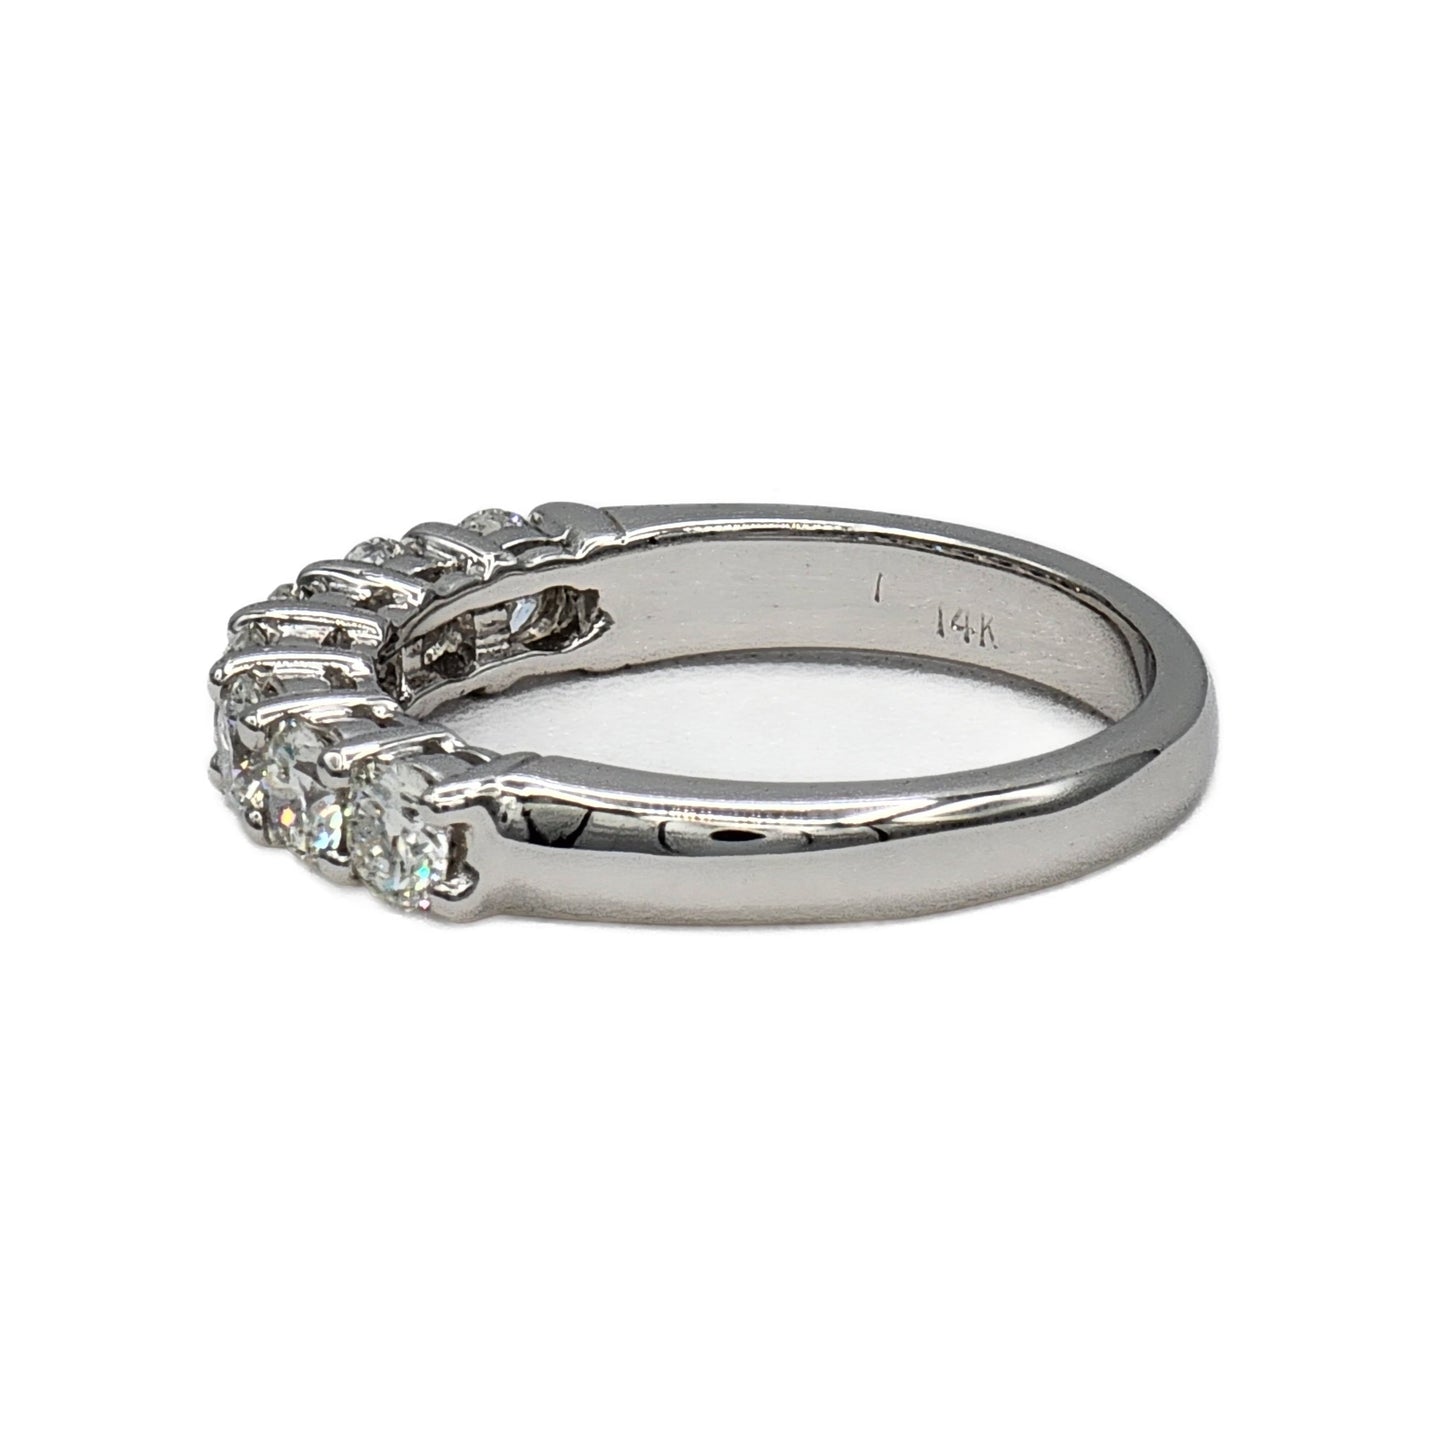 7=1.04 Carat Total Weight Shared Prong Band in 14K White Gold